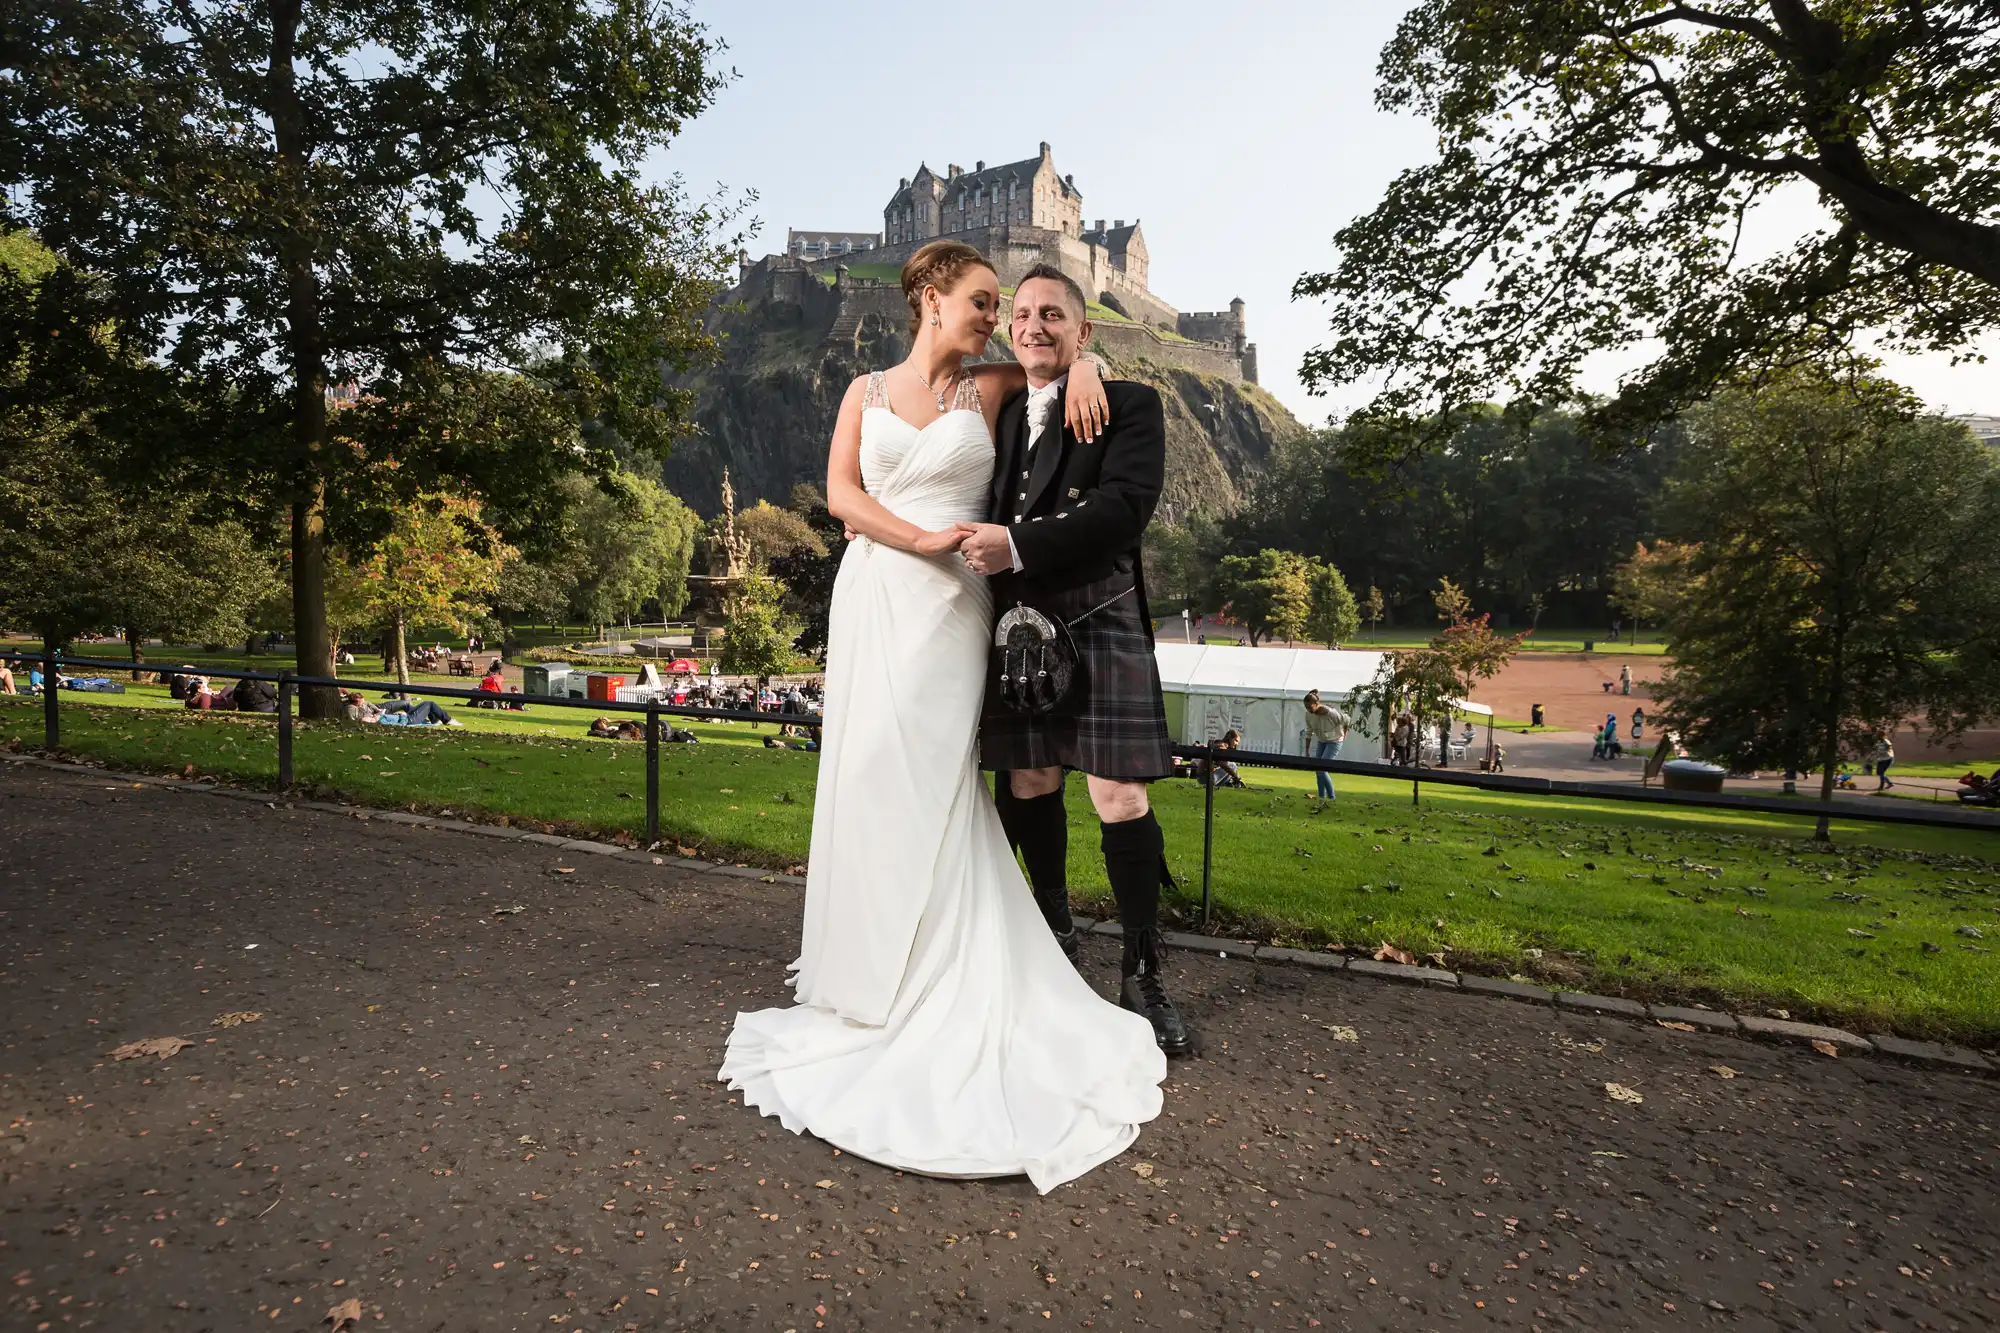 A bride in a white dress and a groom in a kilt embrace in a park with edinburgh castle in the background.